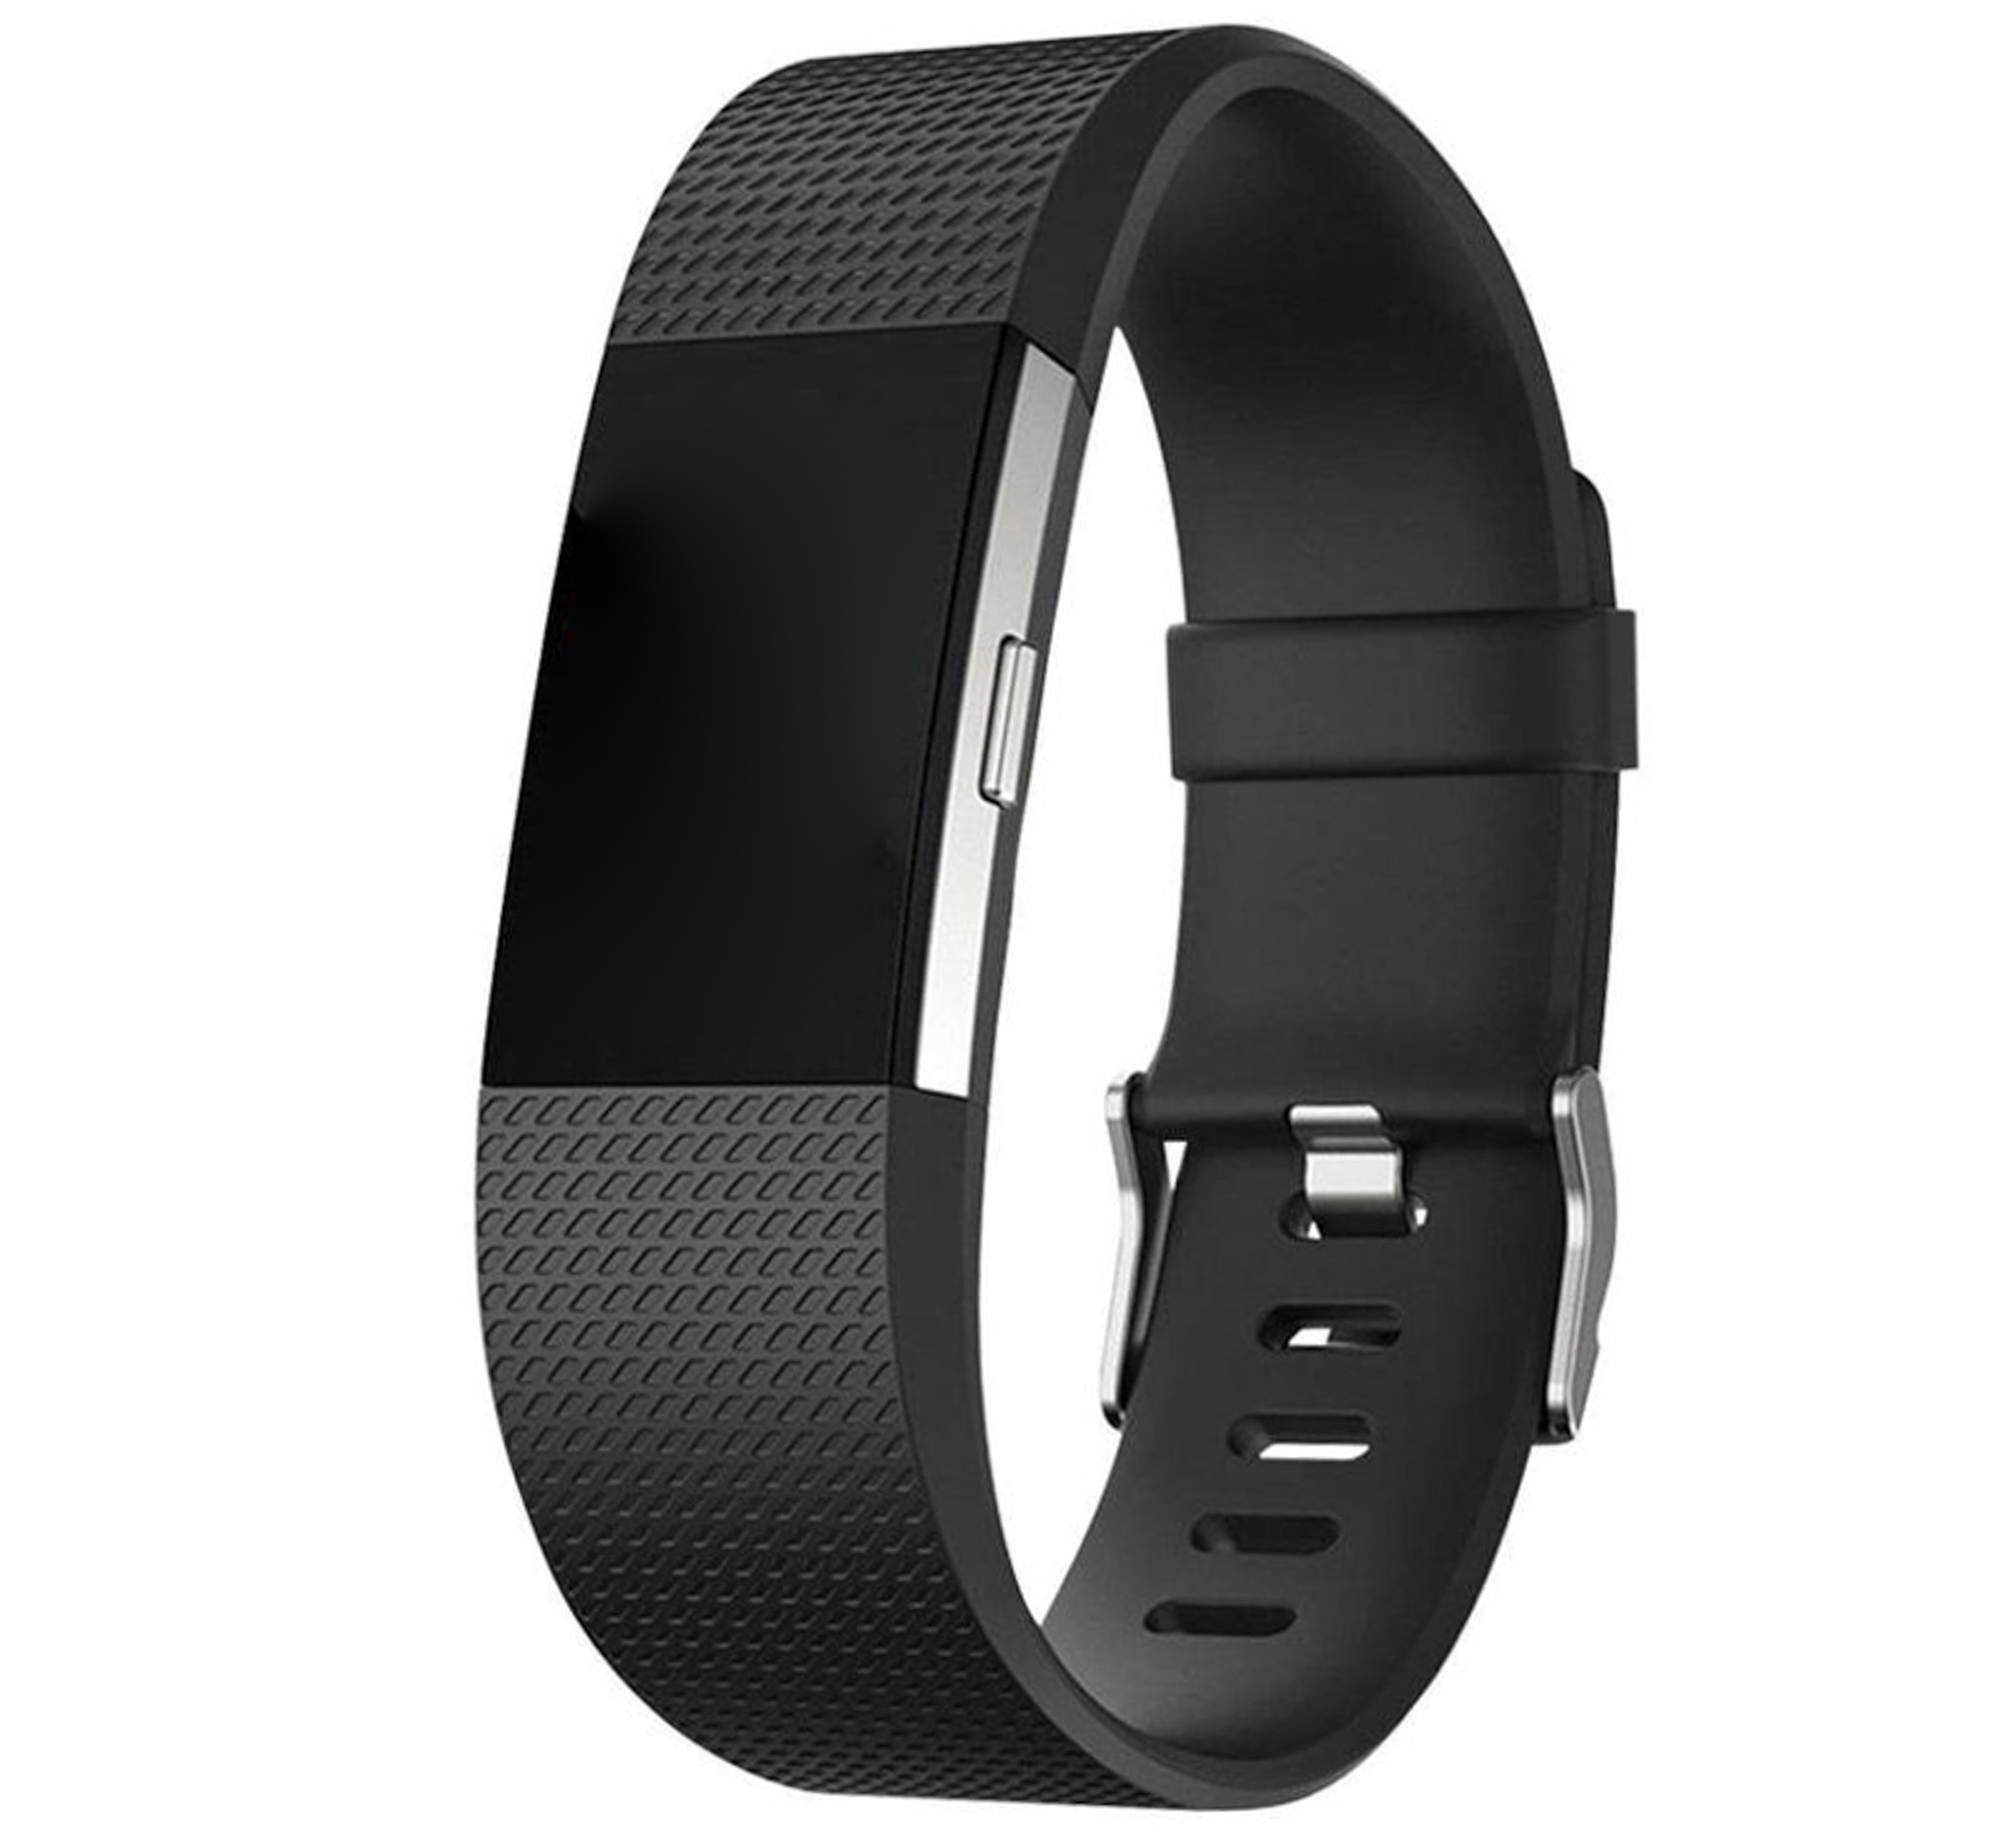 Fitbit Charge 2 sport band - zwart